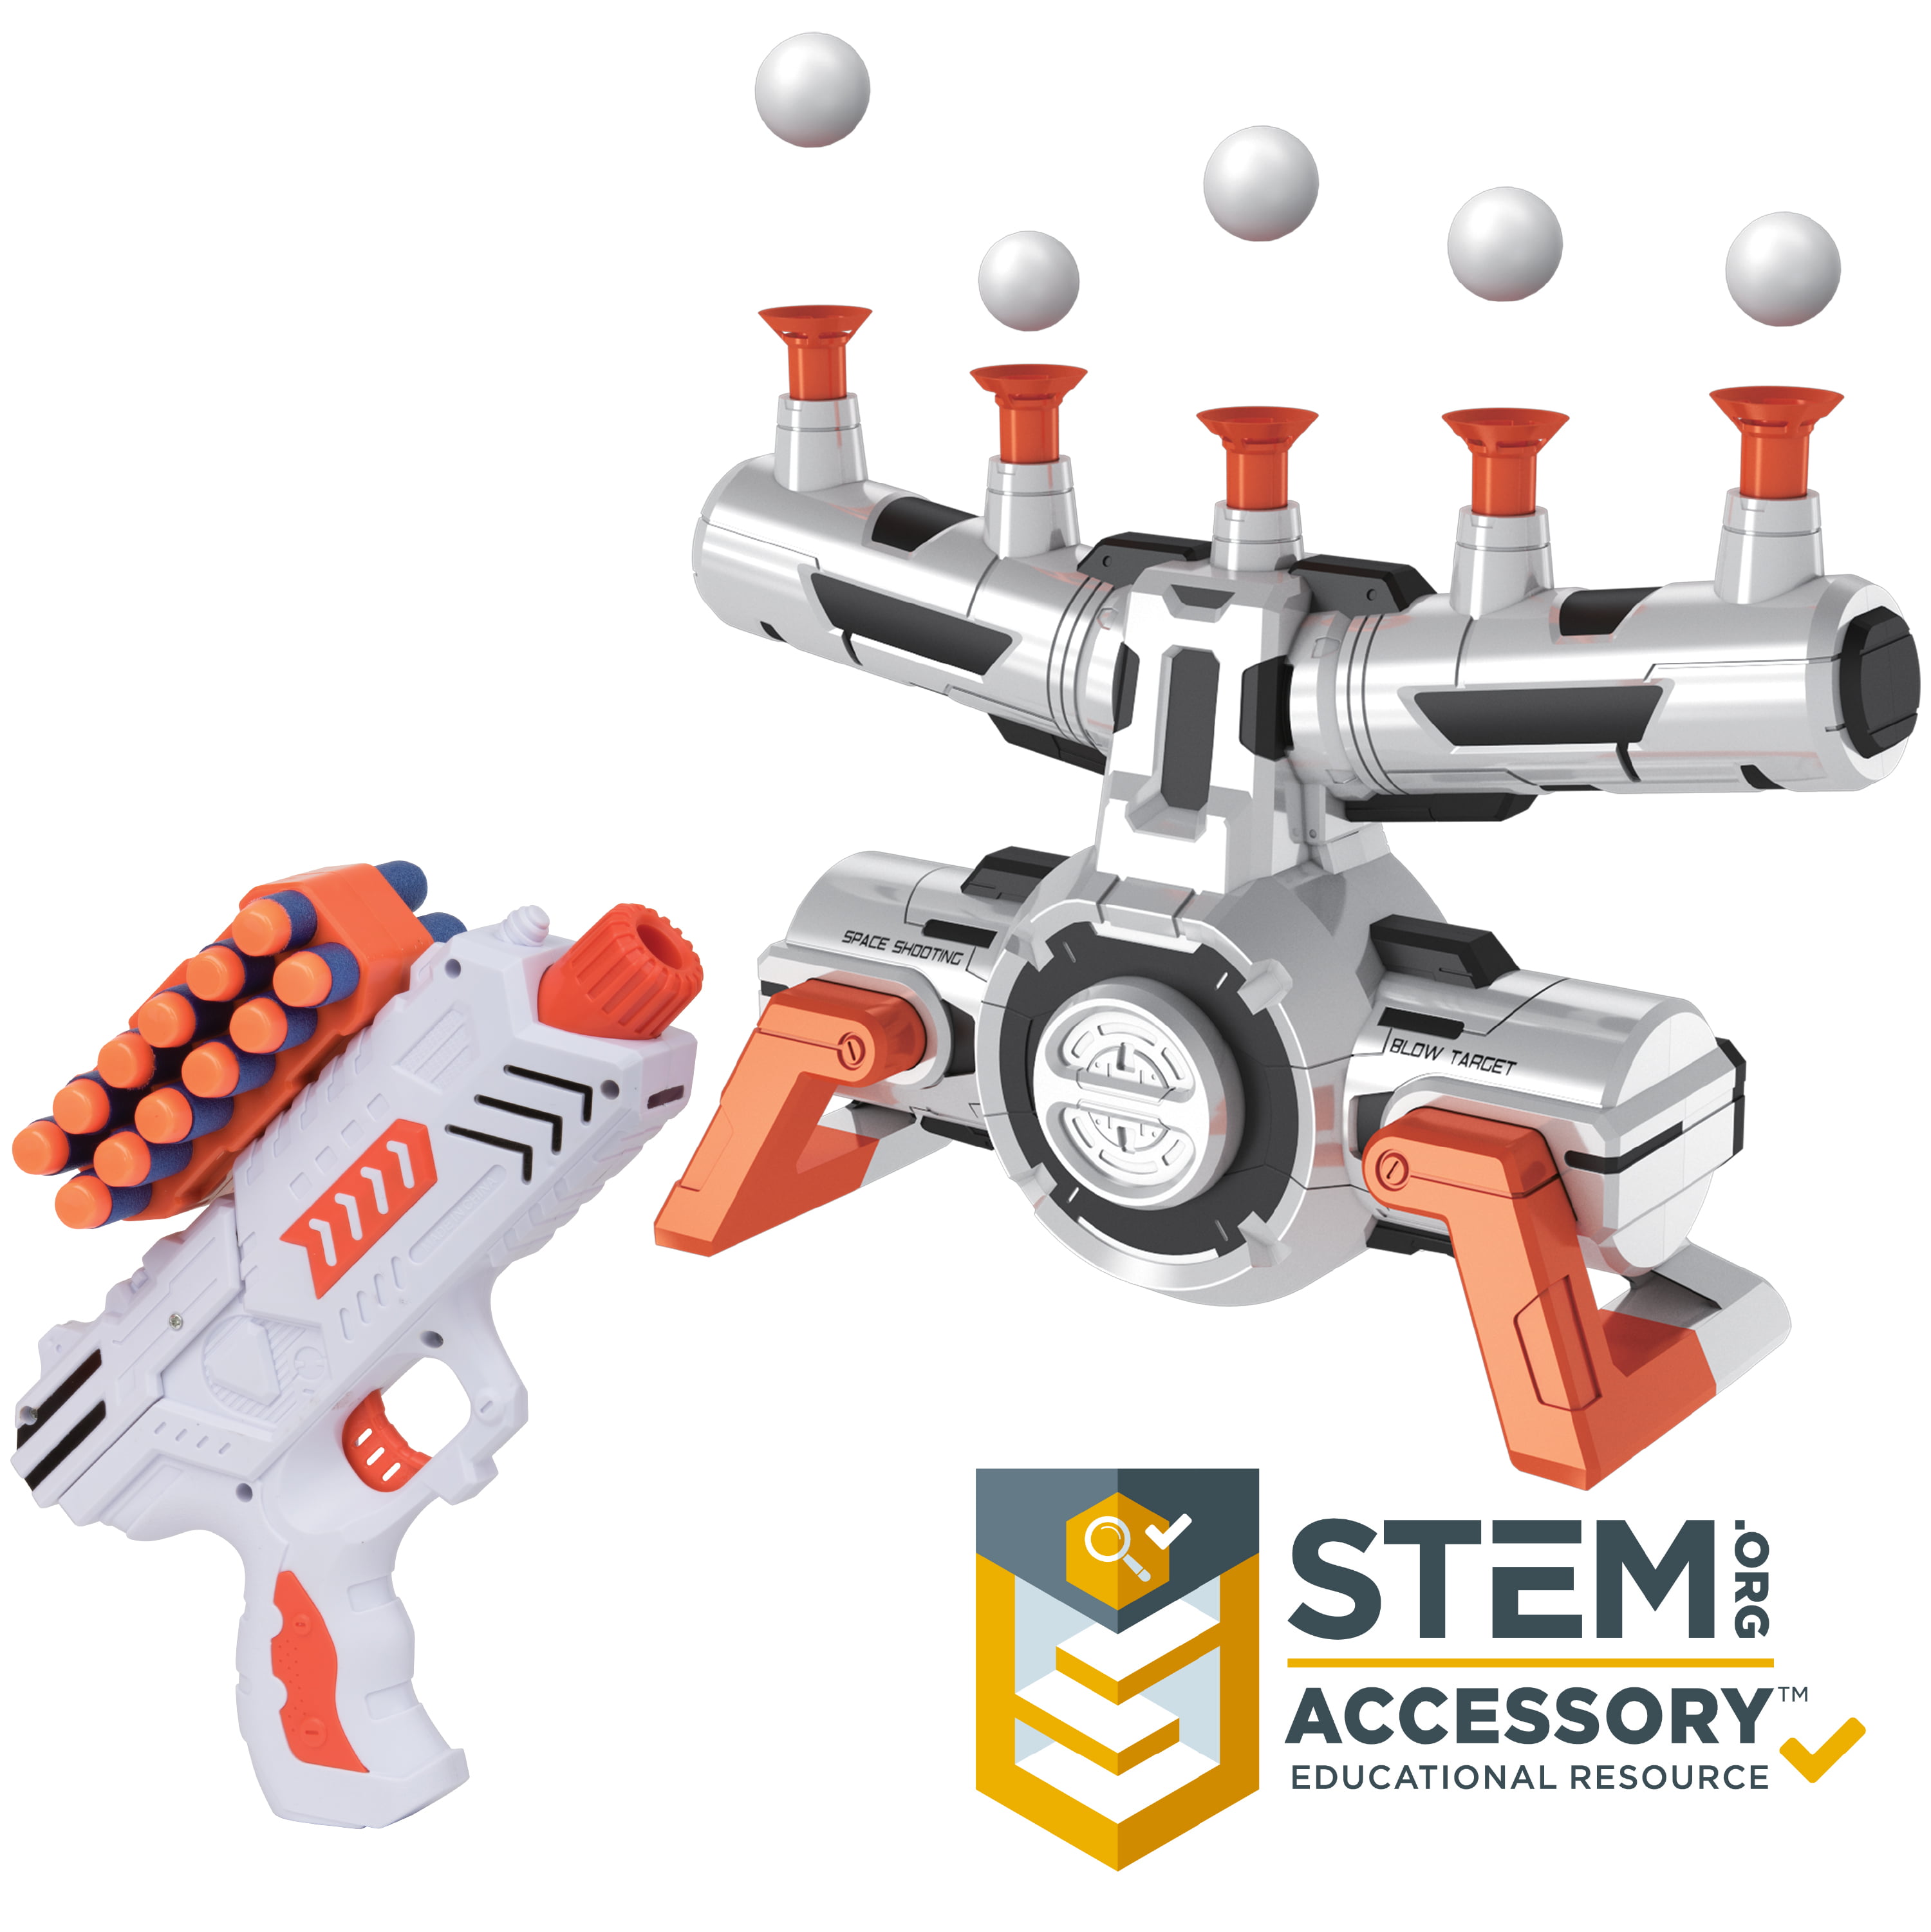 AstroShot Zero G Floating Orbs Nerf Target Practice with Blaster Toy Guns for Boys or Girls and Foam Darts USA Toyz Compatible Nerf Targets for Shooting